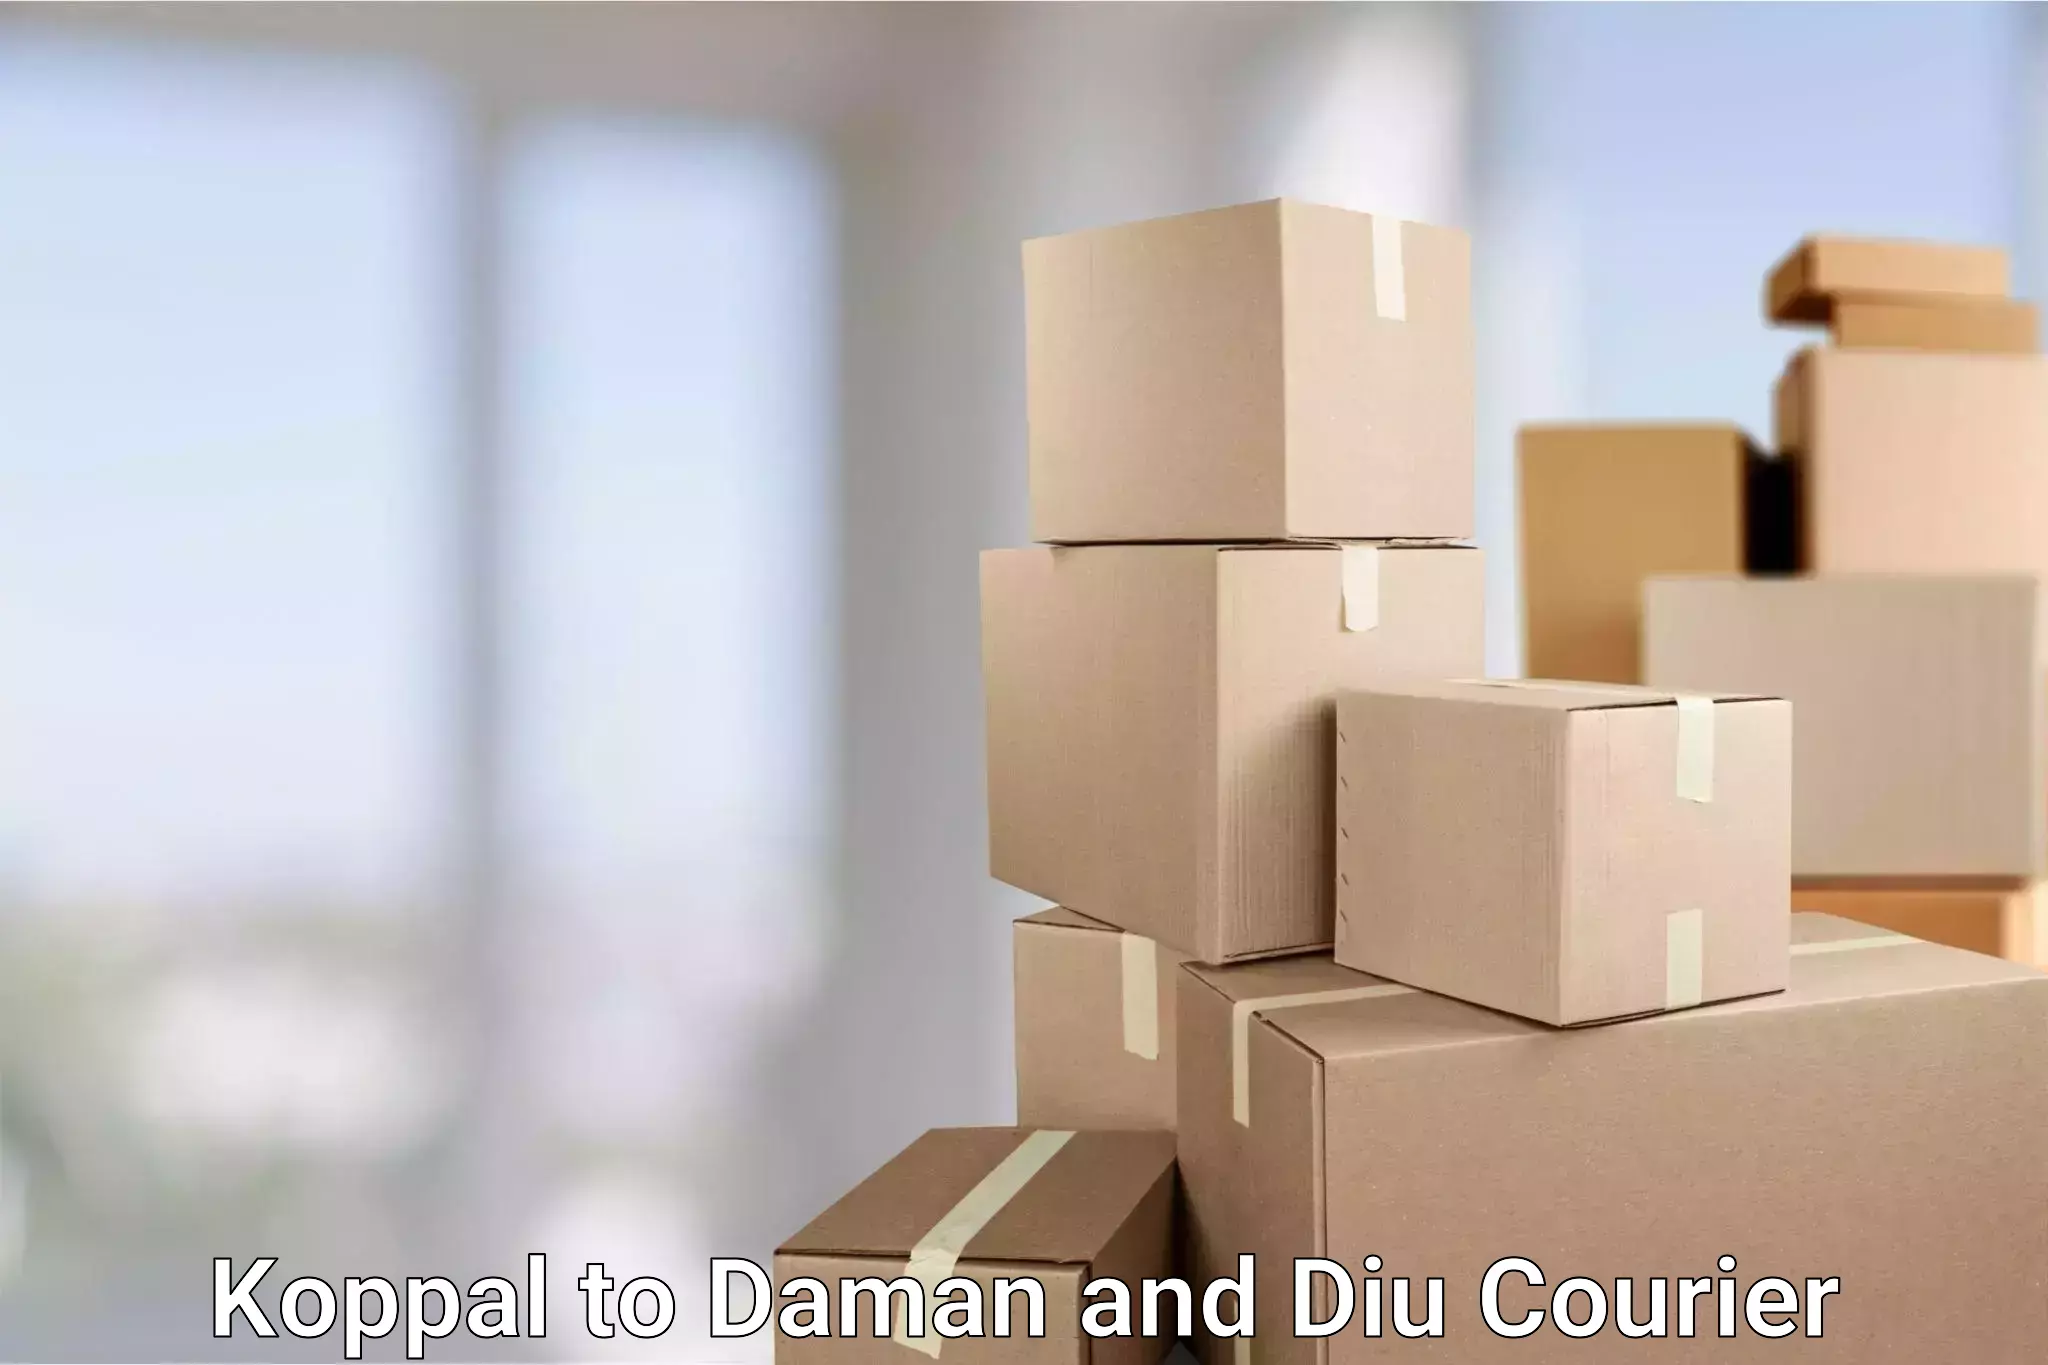 Punctual parcel services Koppal to Daman and Diu